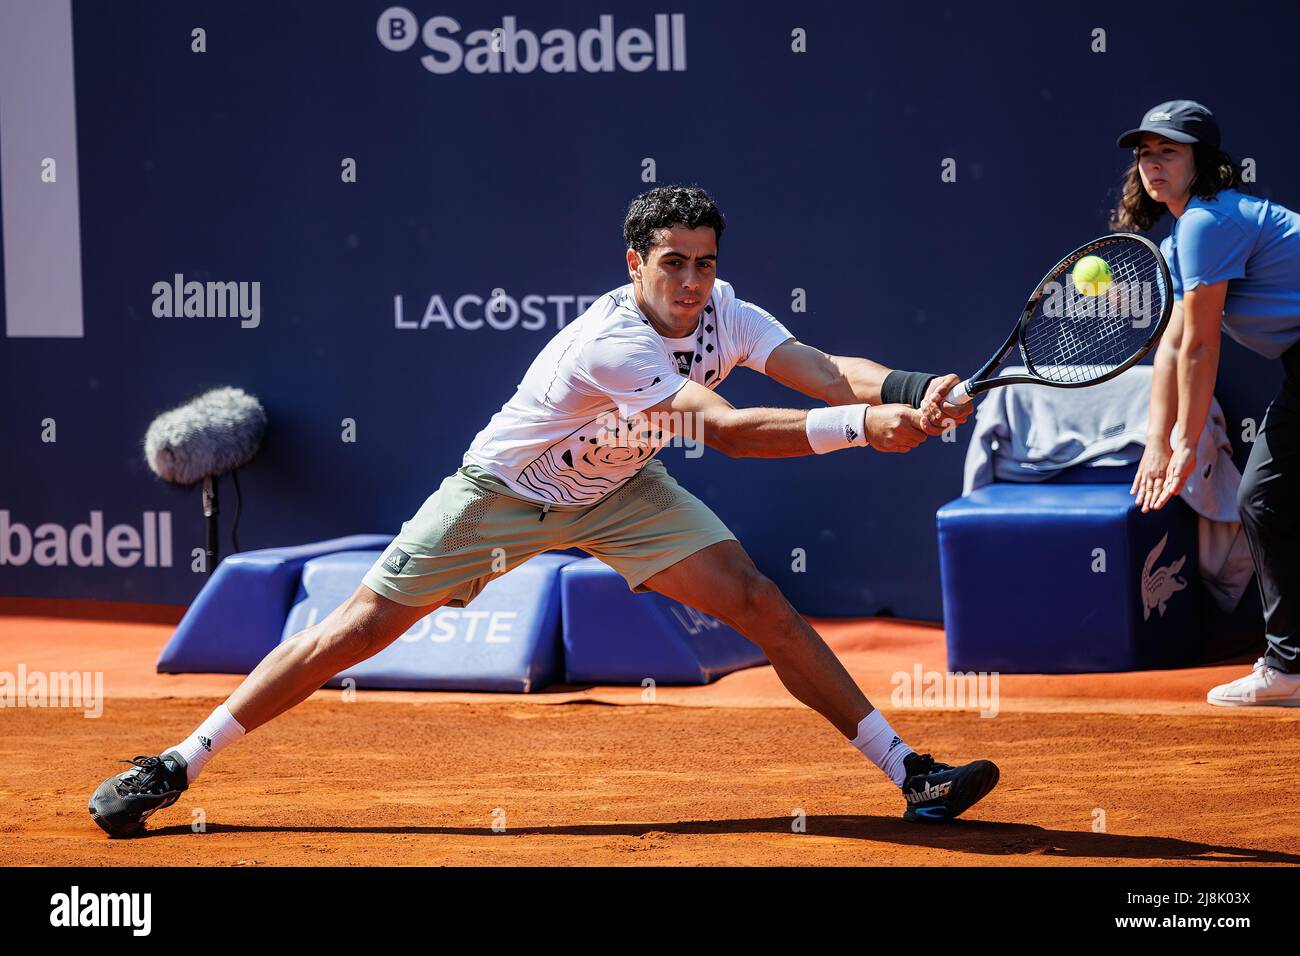 BARCELONA - APR 18: Jaume Munar in action during the Barcelona Open Banc Sabadell Tennis Tournament at Real Club De Tenis Barcelona on April 18, 2022 Stock Photo